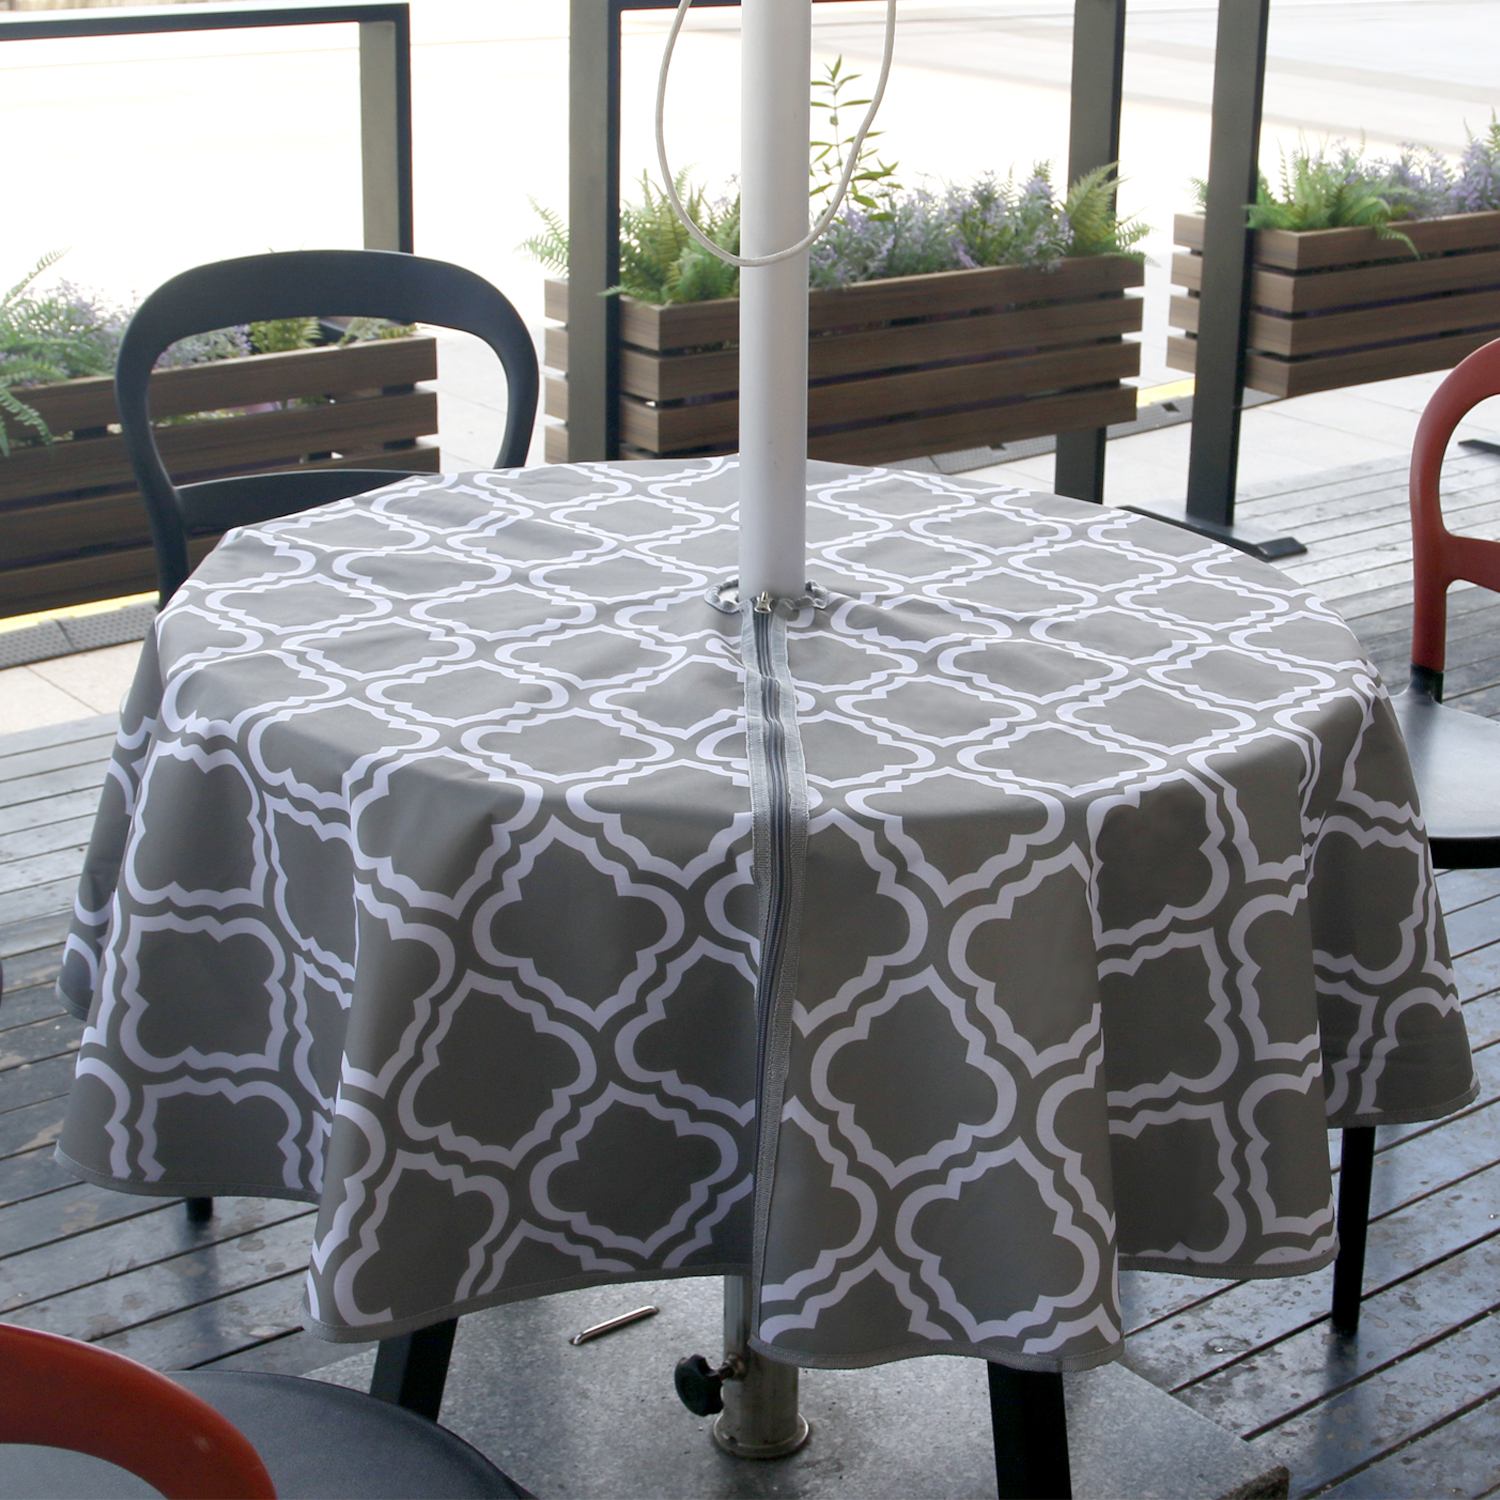 Details about   American Stars Zippered Elasticized Umbrella Table Cover  